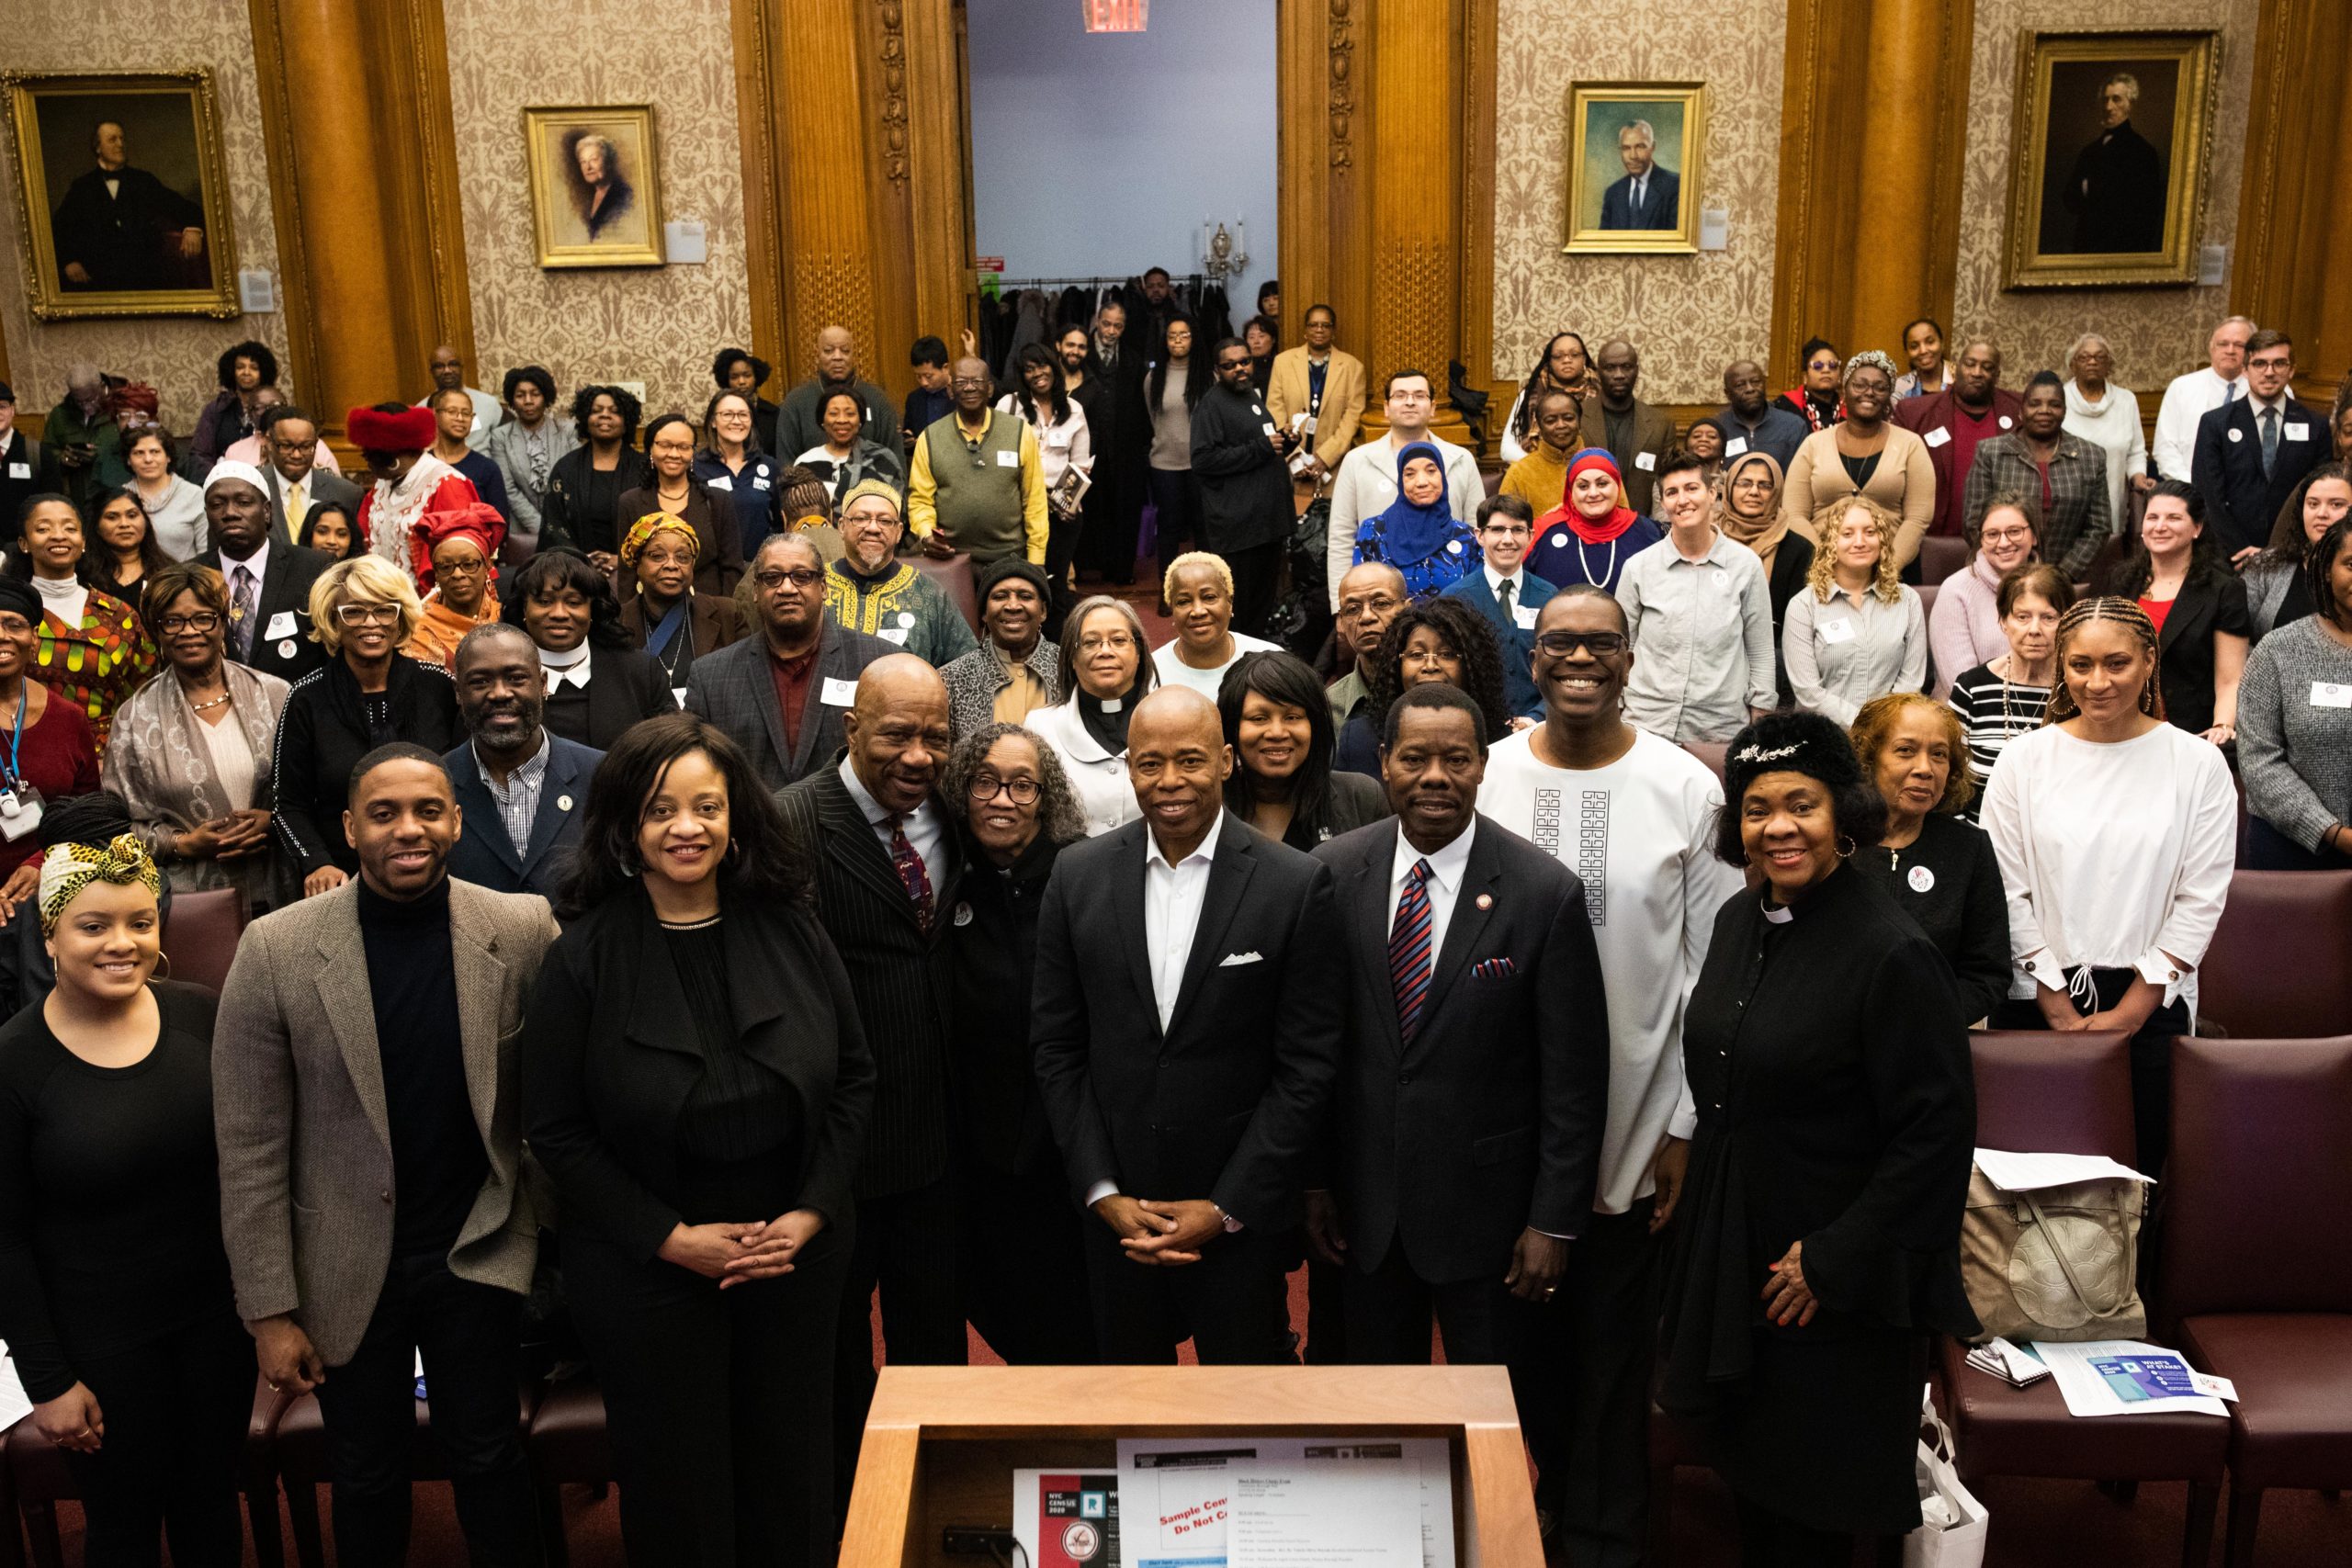 Borough President Eric Adams poses for a photo with local clergy members at a Black History Month event at Borough Hall. Photo: Paul Frangipane/Brooklyn Eagle